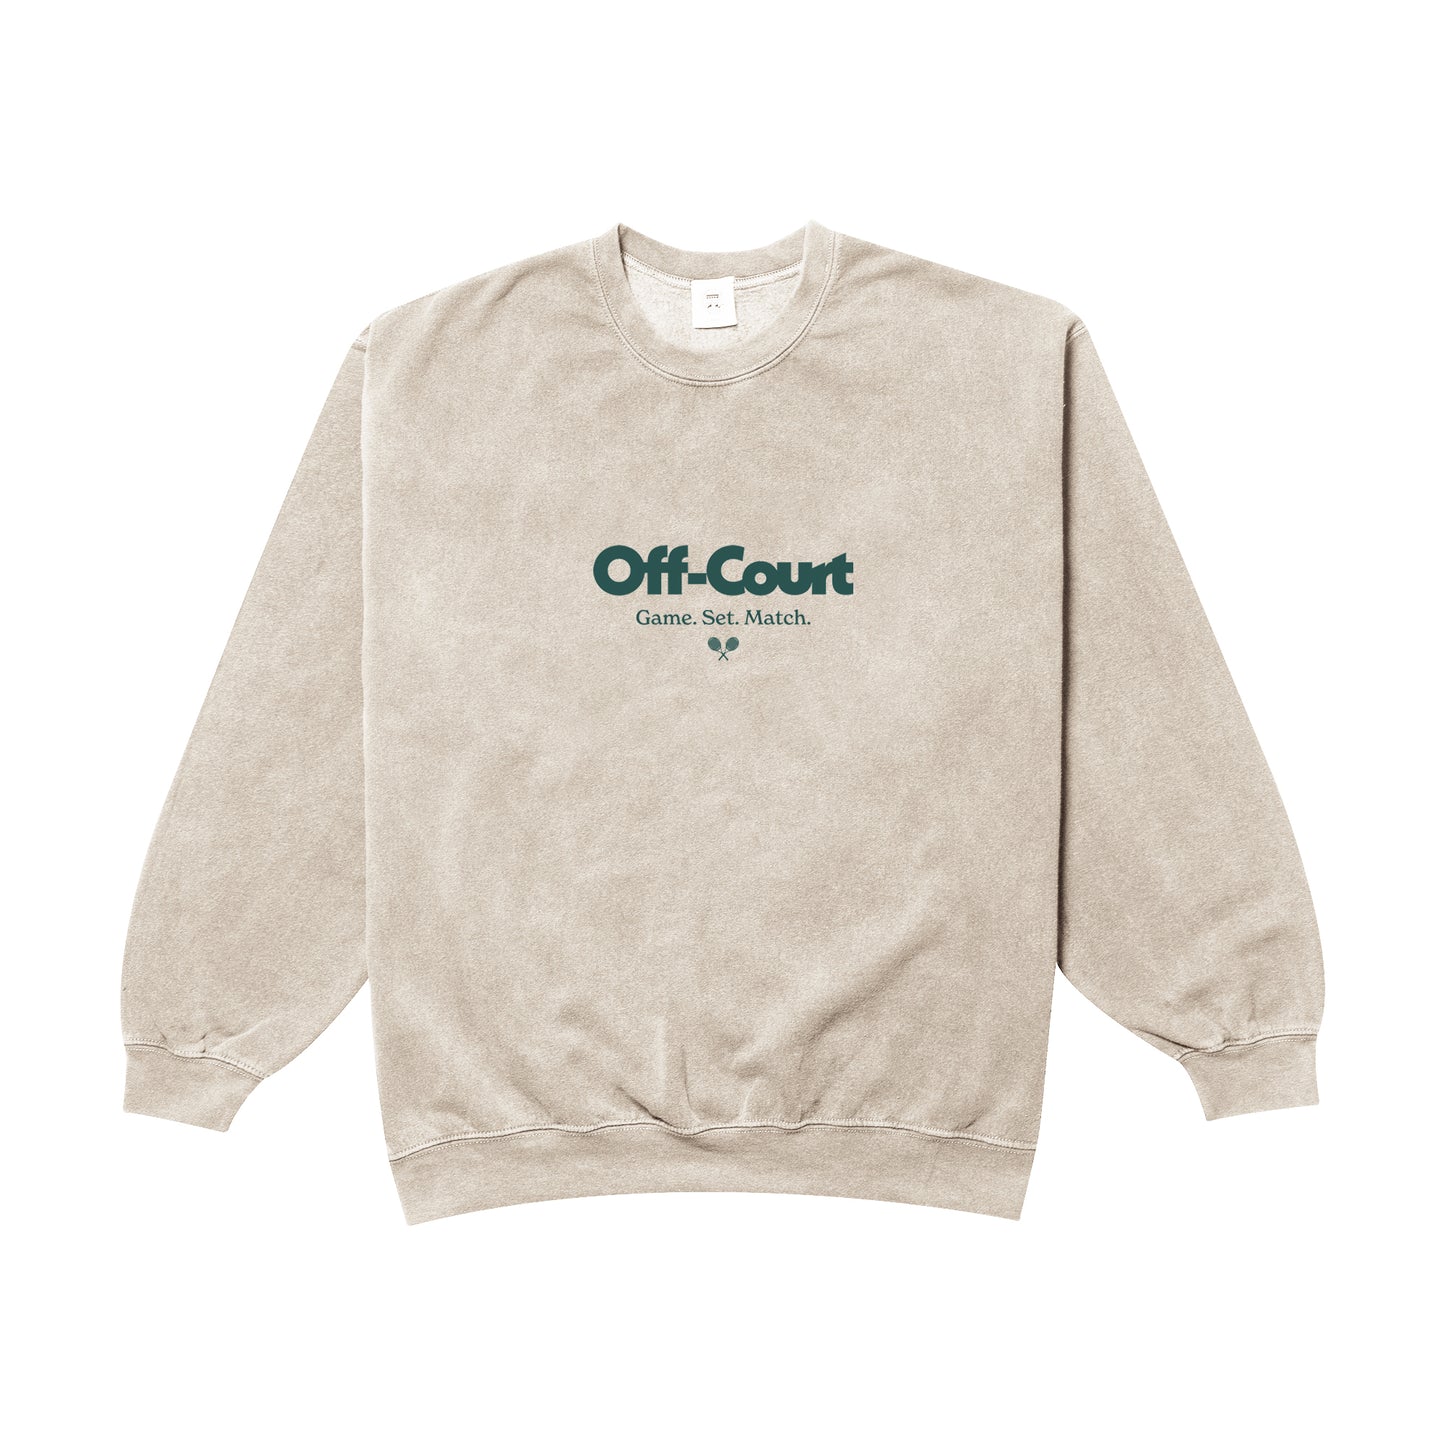 Vice 84 'Off Court GSM' Vintage Washed Sweater - Cream